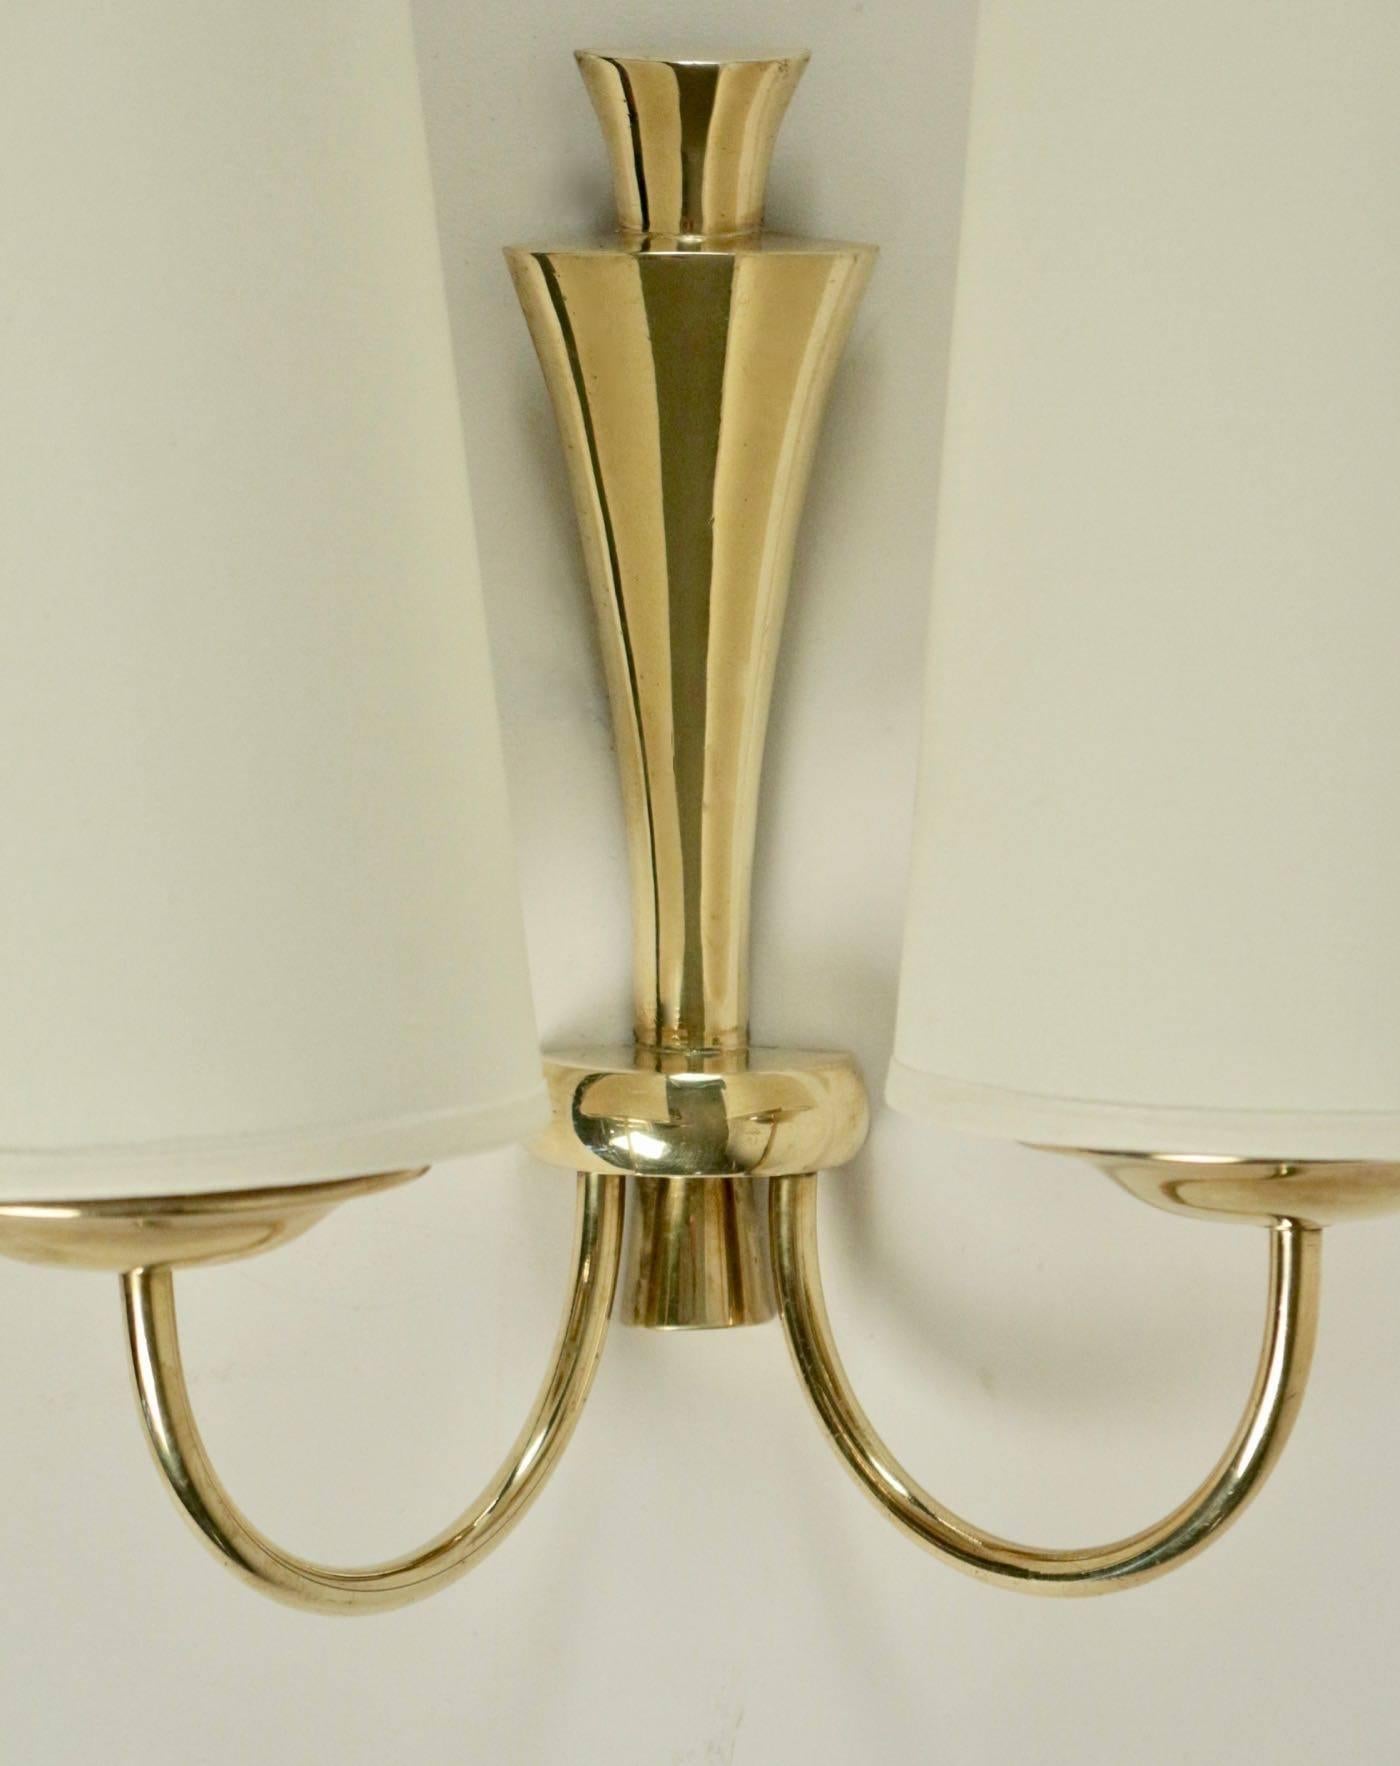 Pair of 1950s Arlus brass sconces.

Two curved arms with cup, and back plate made of gilded brass.
Handmade lampshades of white cotton granted to the originals.

Two bulbs per sconces.
 